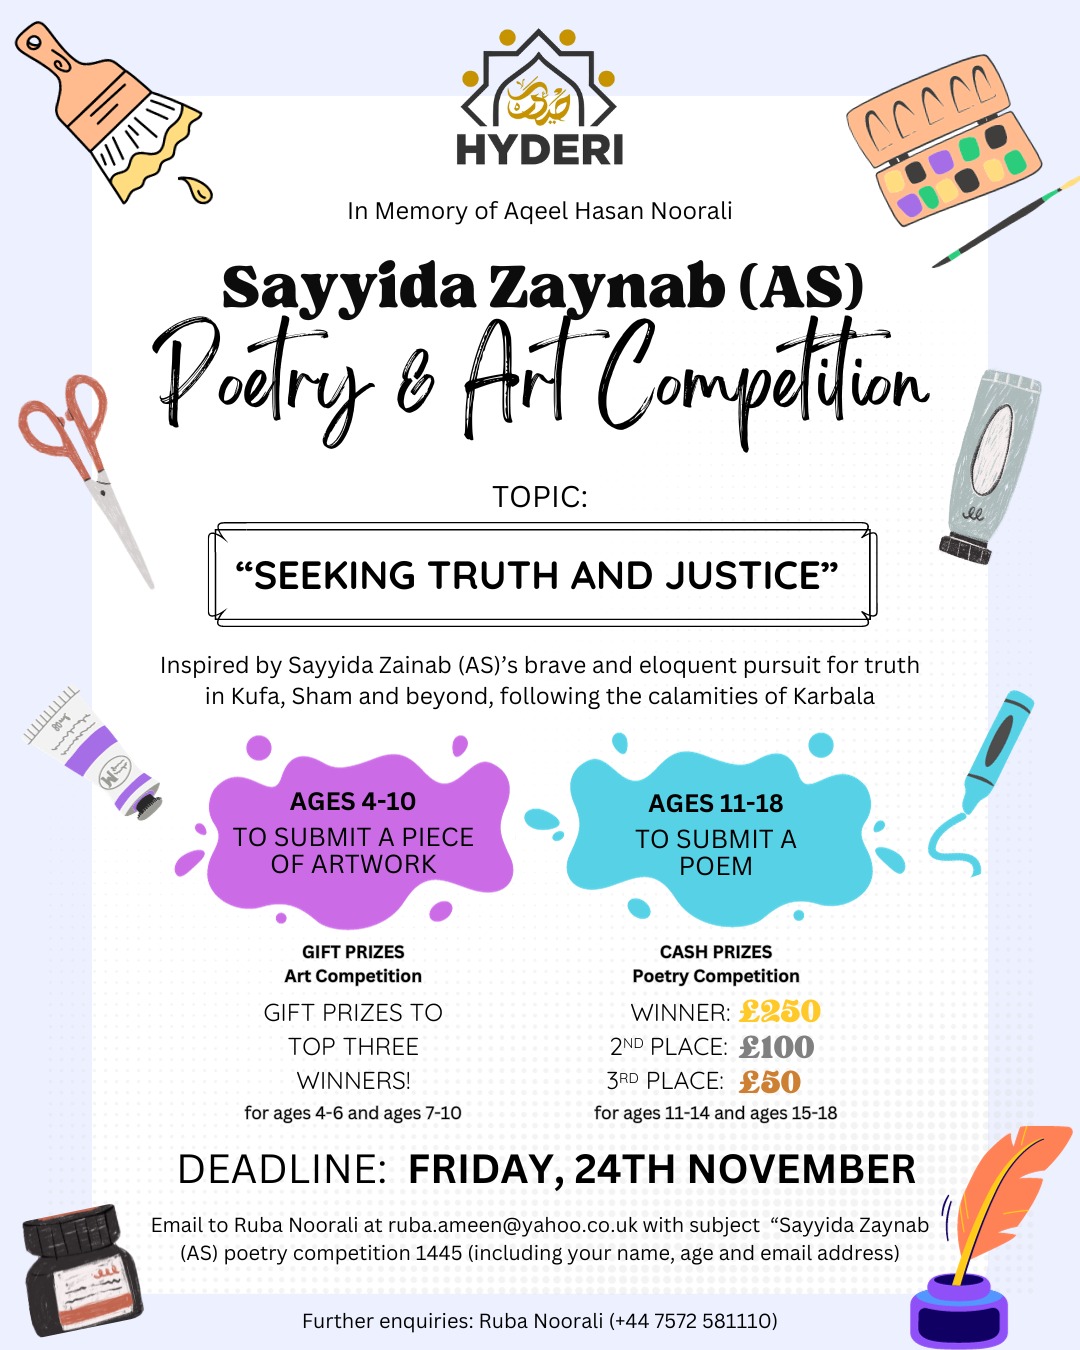 Sayyida Zaynab (AS) – Poetry & Art Competition